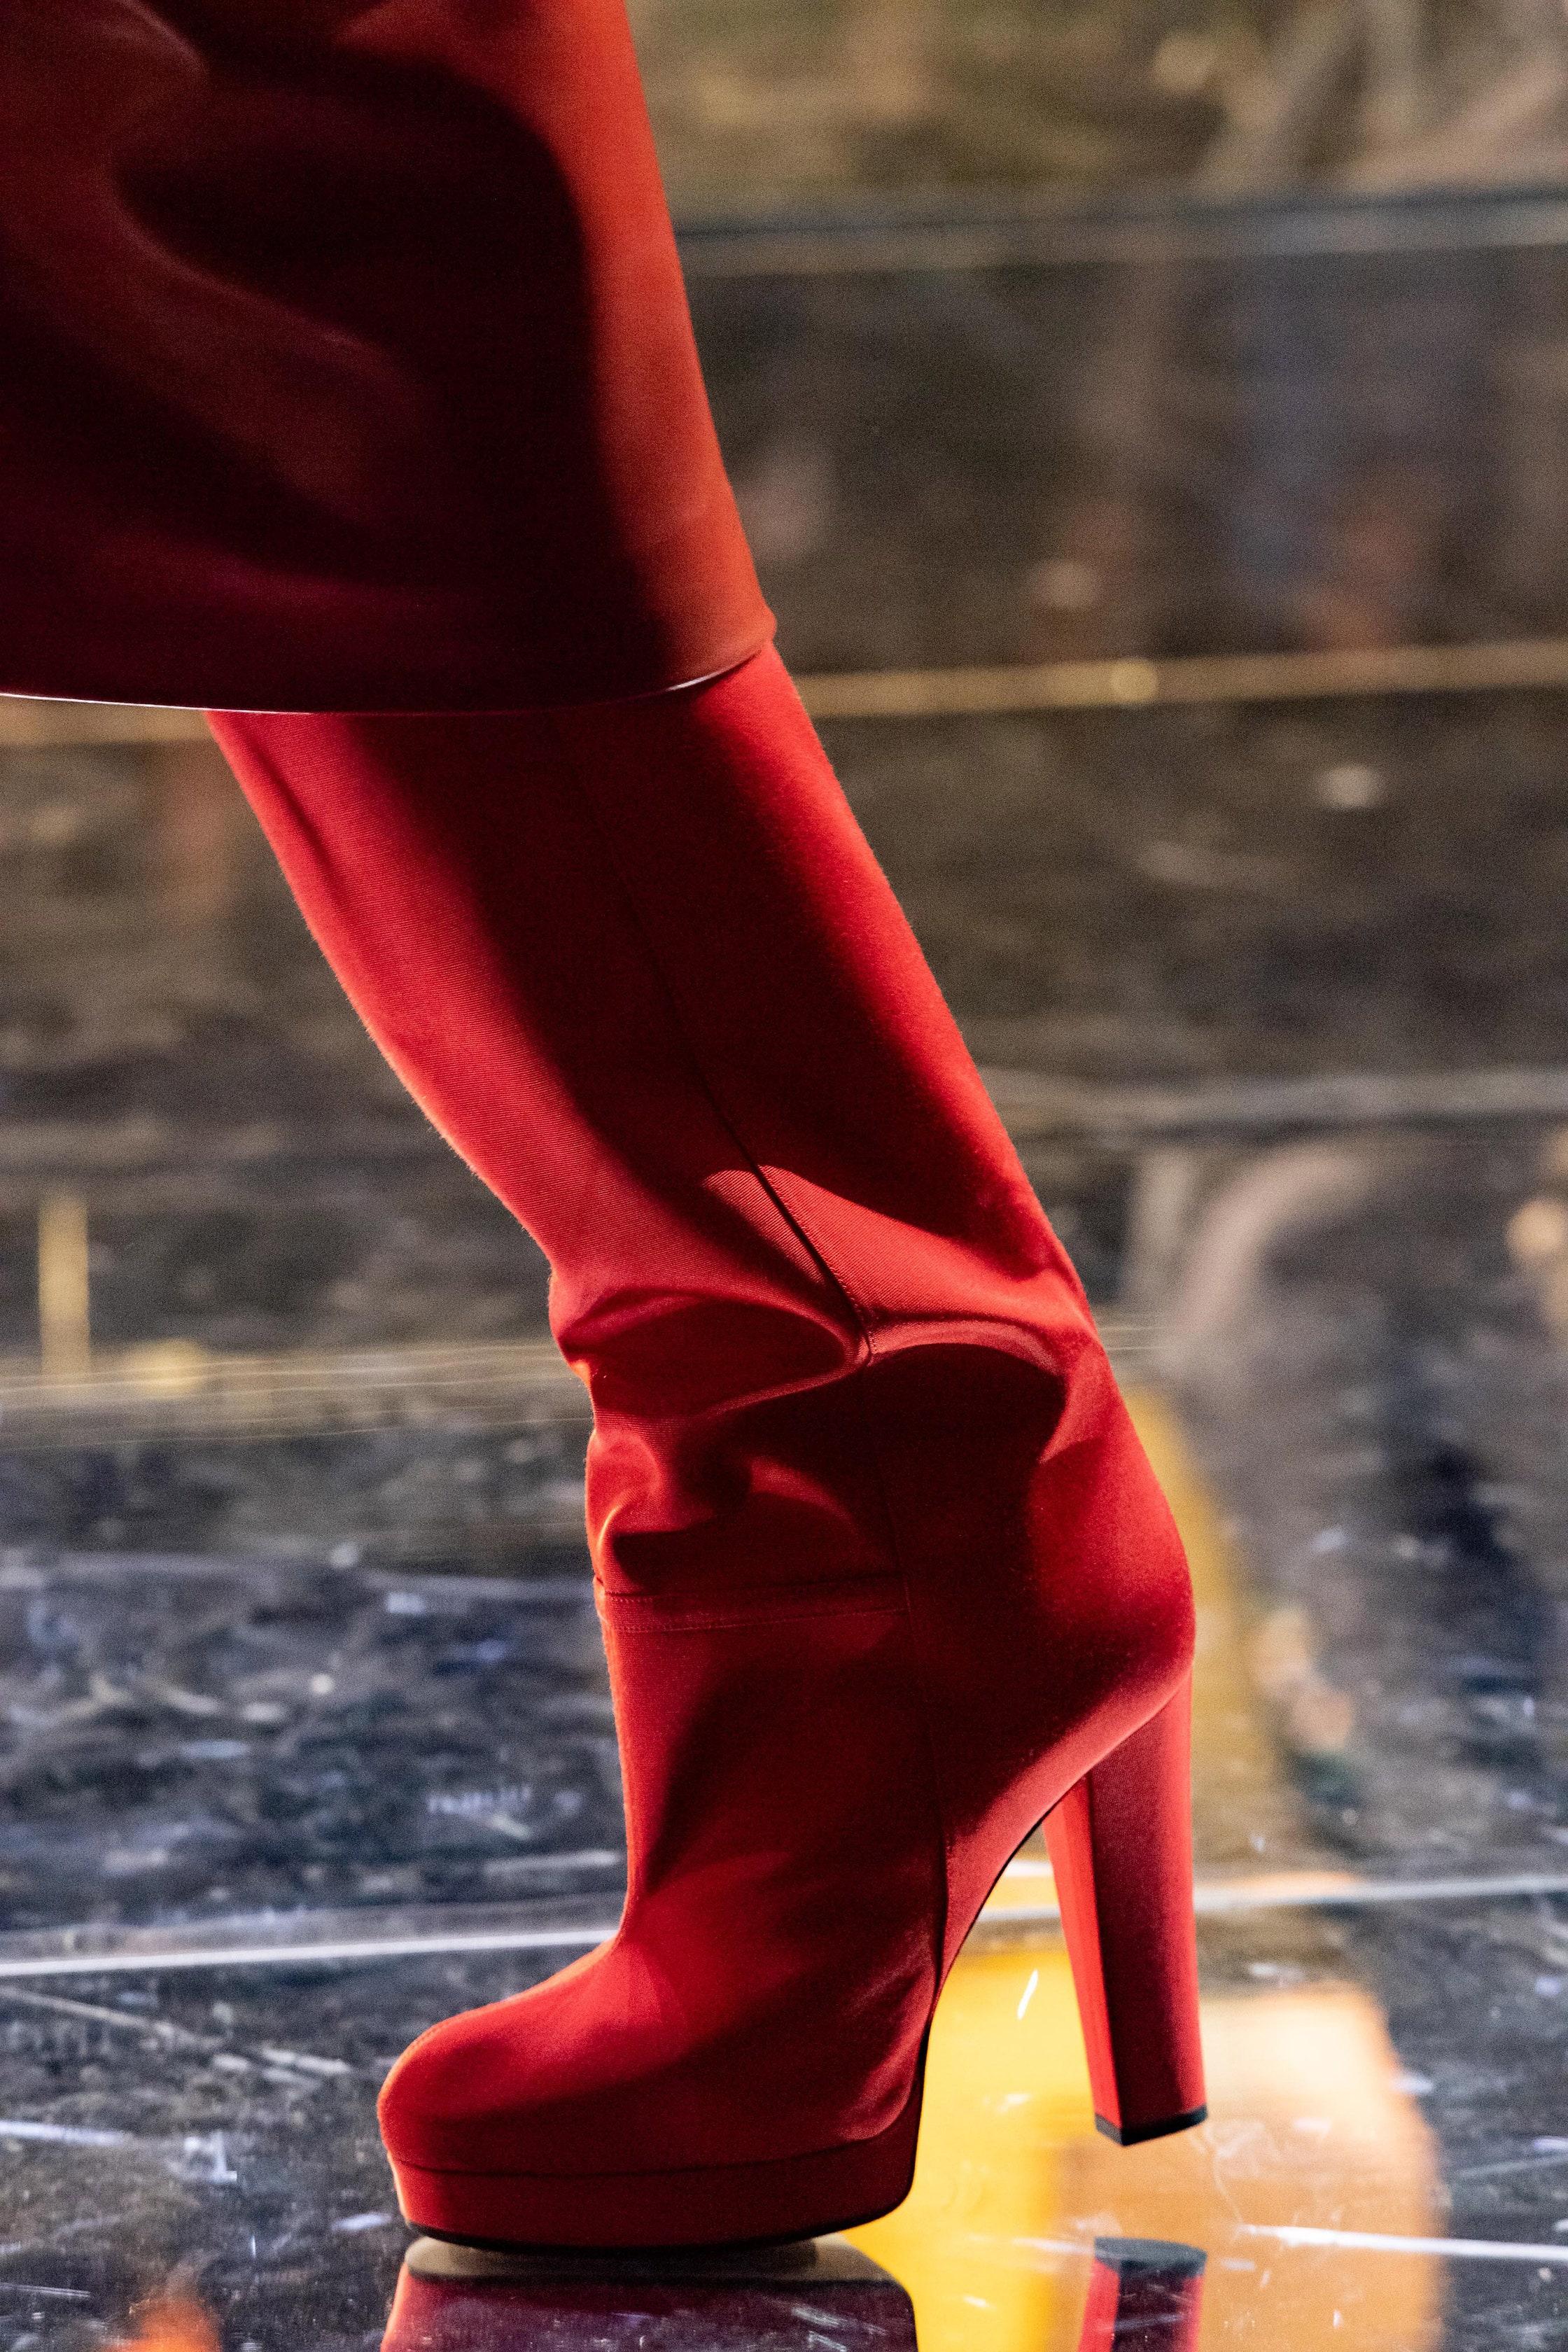 New With Box Gucci Fall 2019 Alessandro Michele Red Boots Sz 36.5 For Sale 9